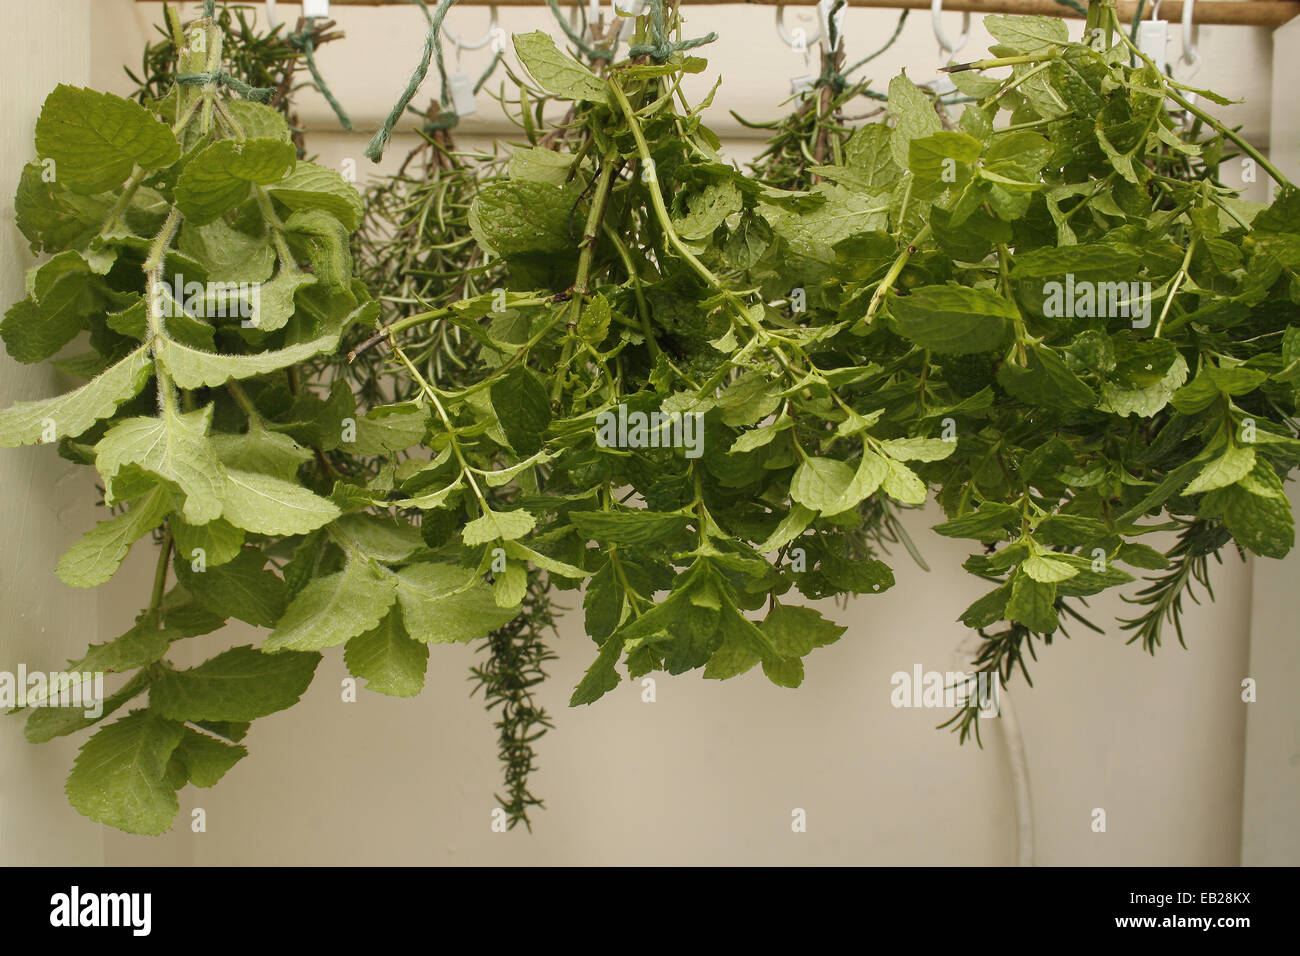 apple mint, spearmint and rosemary hanging in airing cupboard to dry Mentha suaveolens Mentha spicata Rosmarinus officinalis Stock Photo